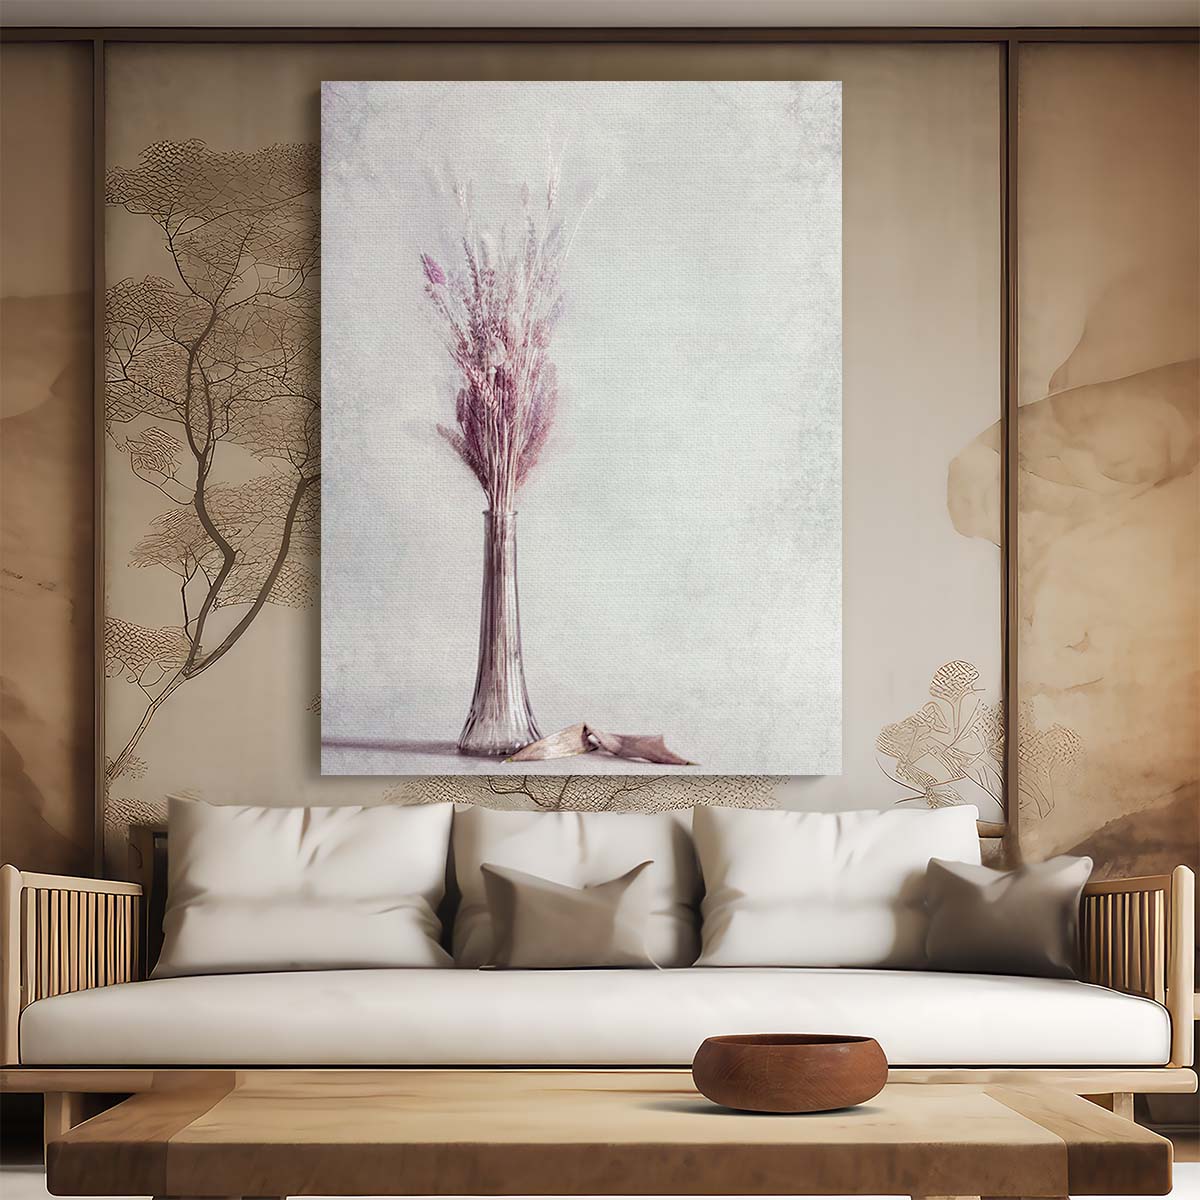 Botanical Photography Soft pink floral still life with creative double exposure by Luxuriance Designs, made in USA